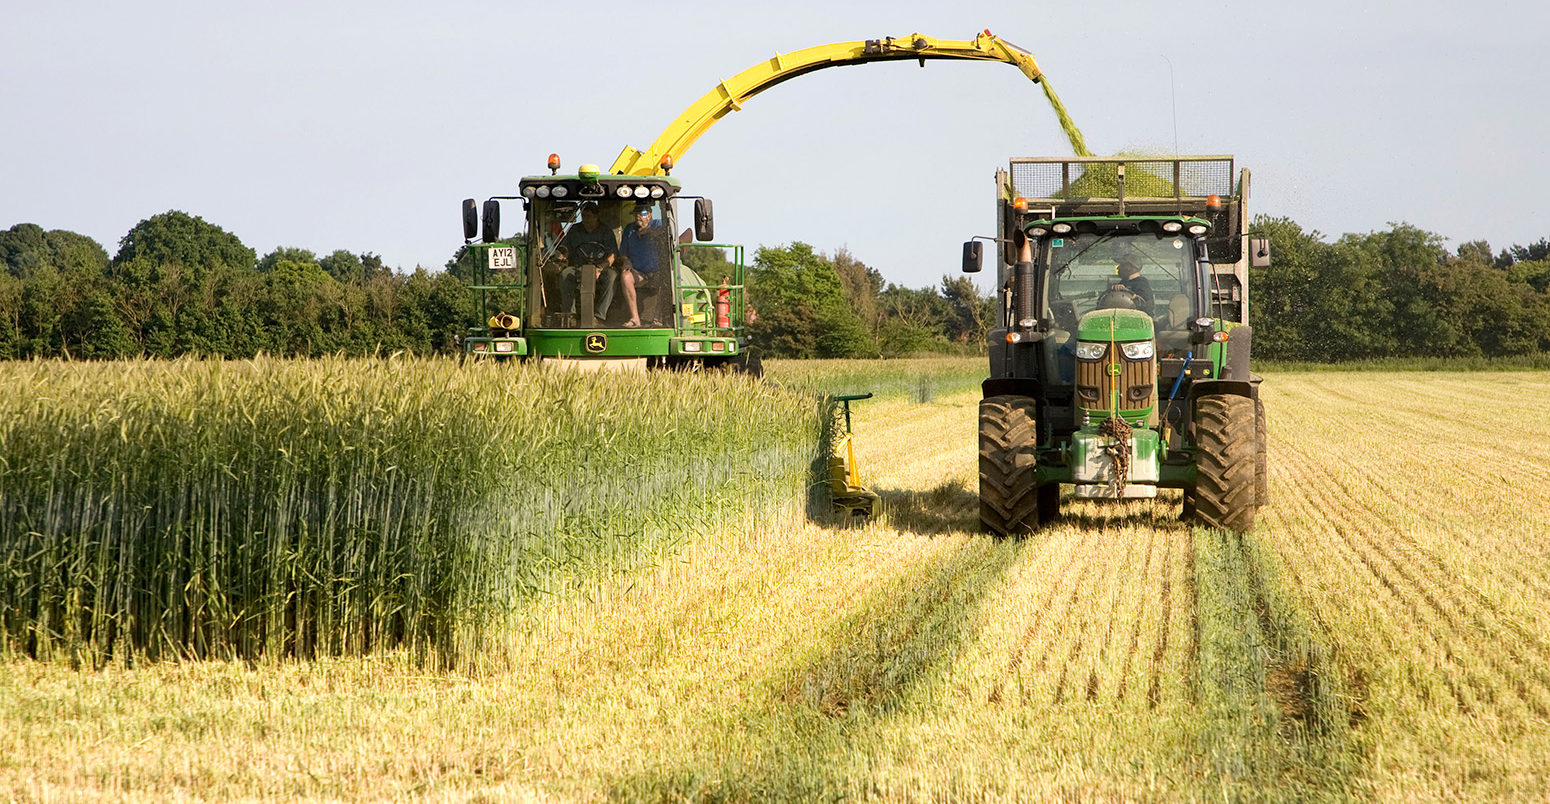 Harvesting rye crop for use as fuel for electricity generation, Shottisham, Suffolk, England. Credit: geogphotos / Alamy Stock Photo. D9TARB